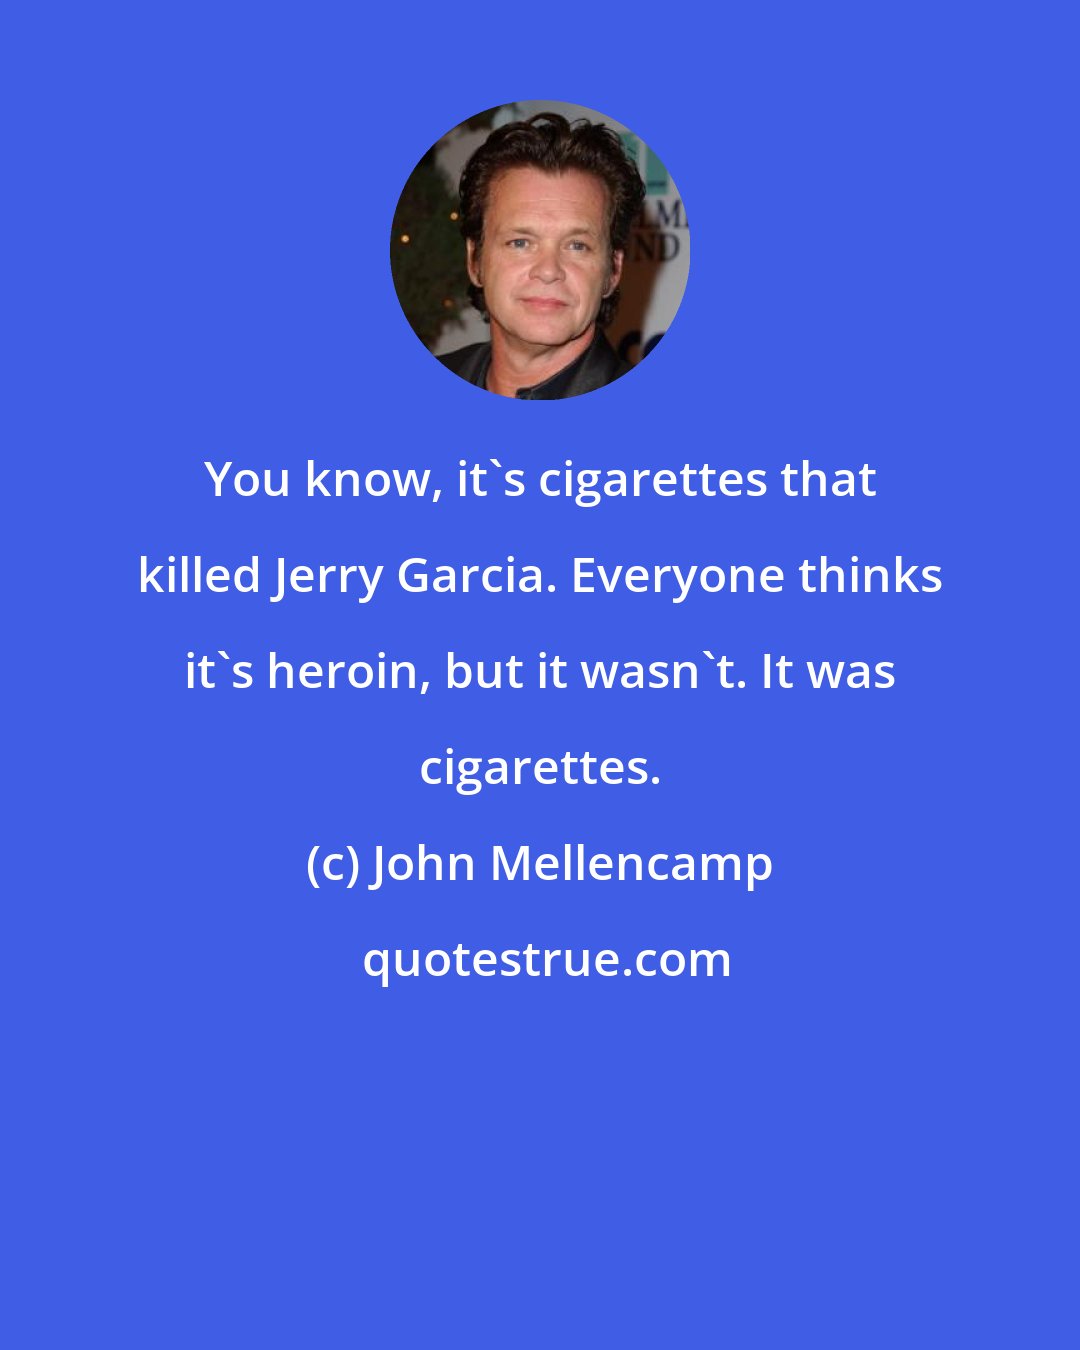 John Mellencamp: You know, it's cigarettes that killed Jerry Garcia. Everyone thinks it's heroin, but it wasn't. It was cigarettes.